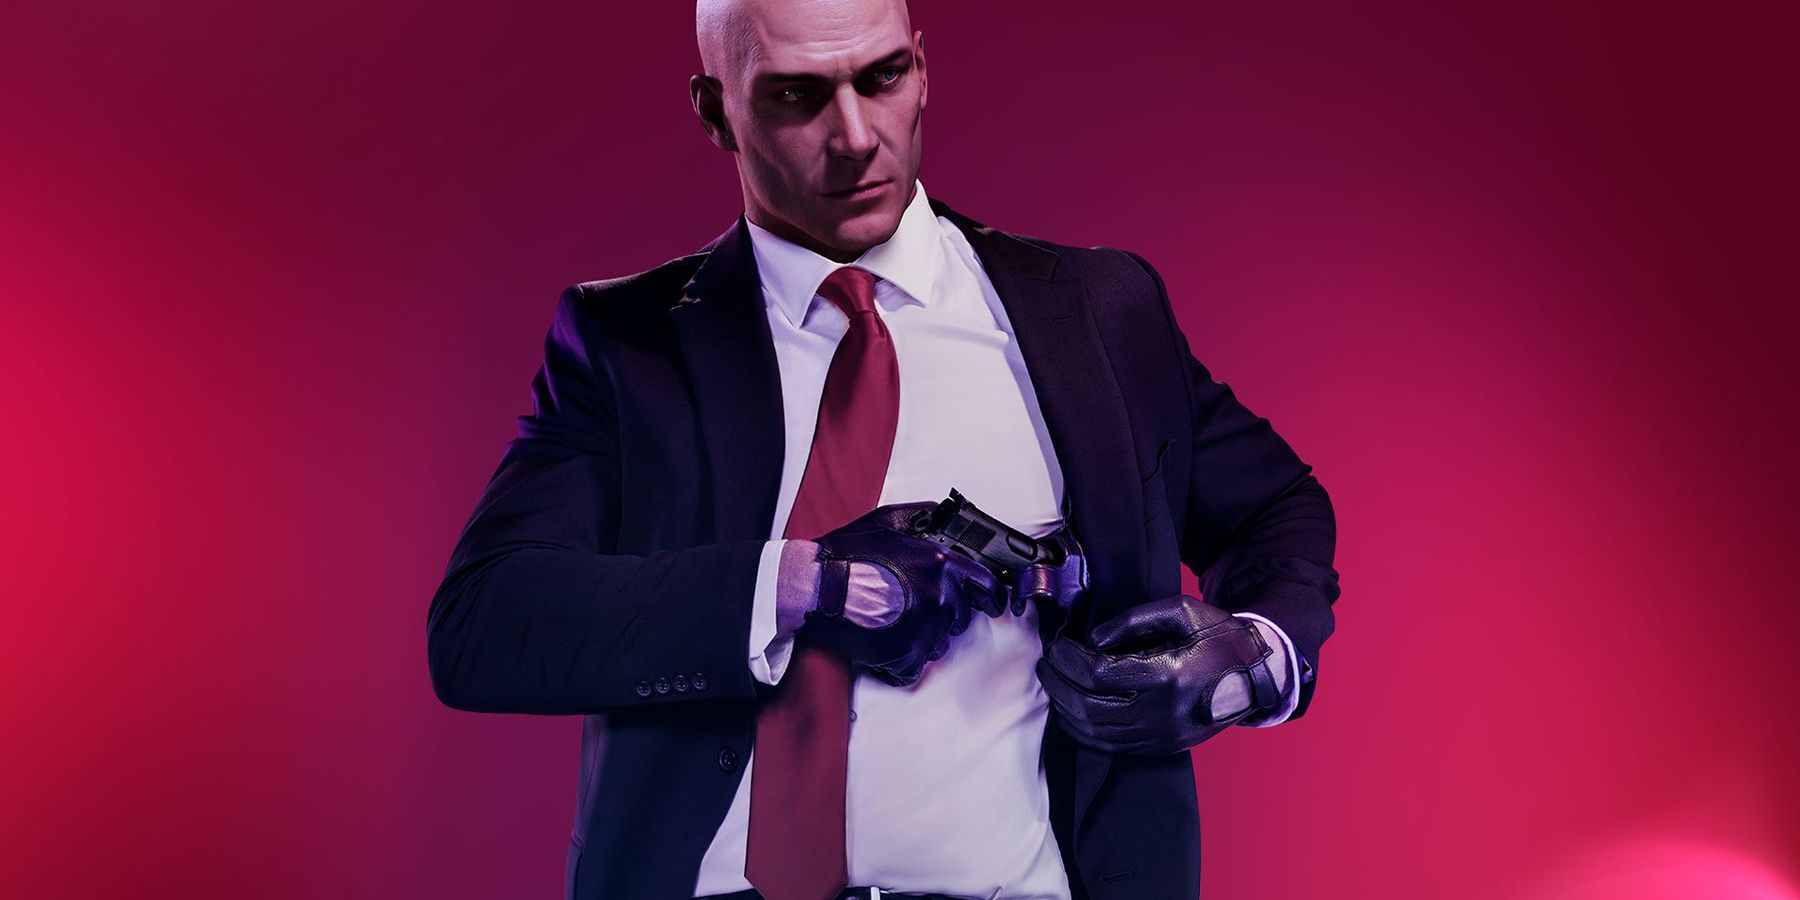 How Long Does Hitman 2 Take To Beat?